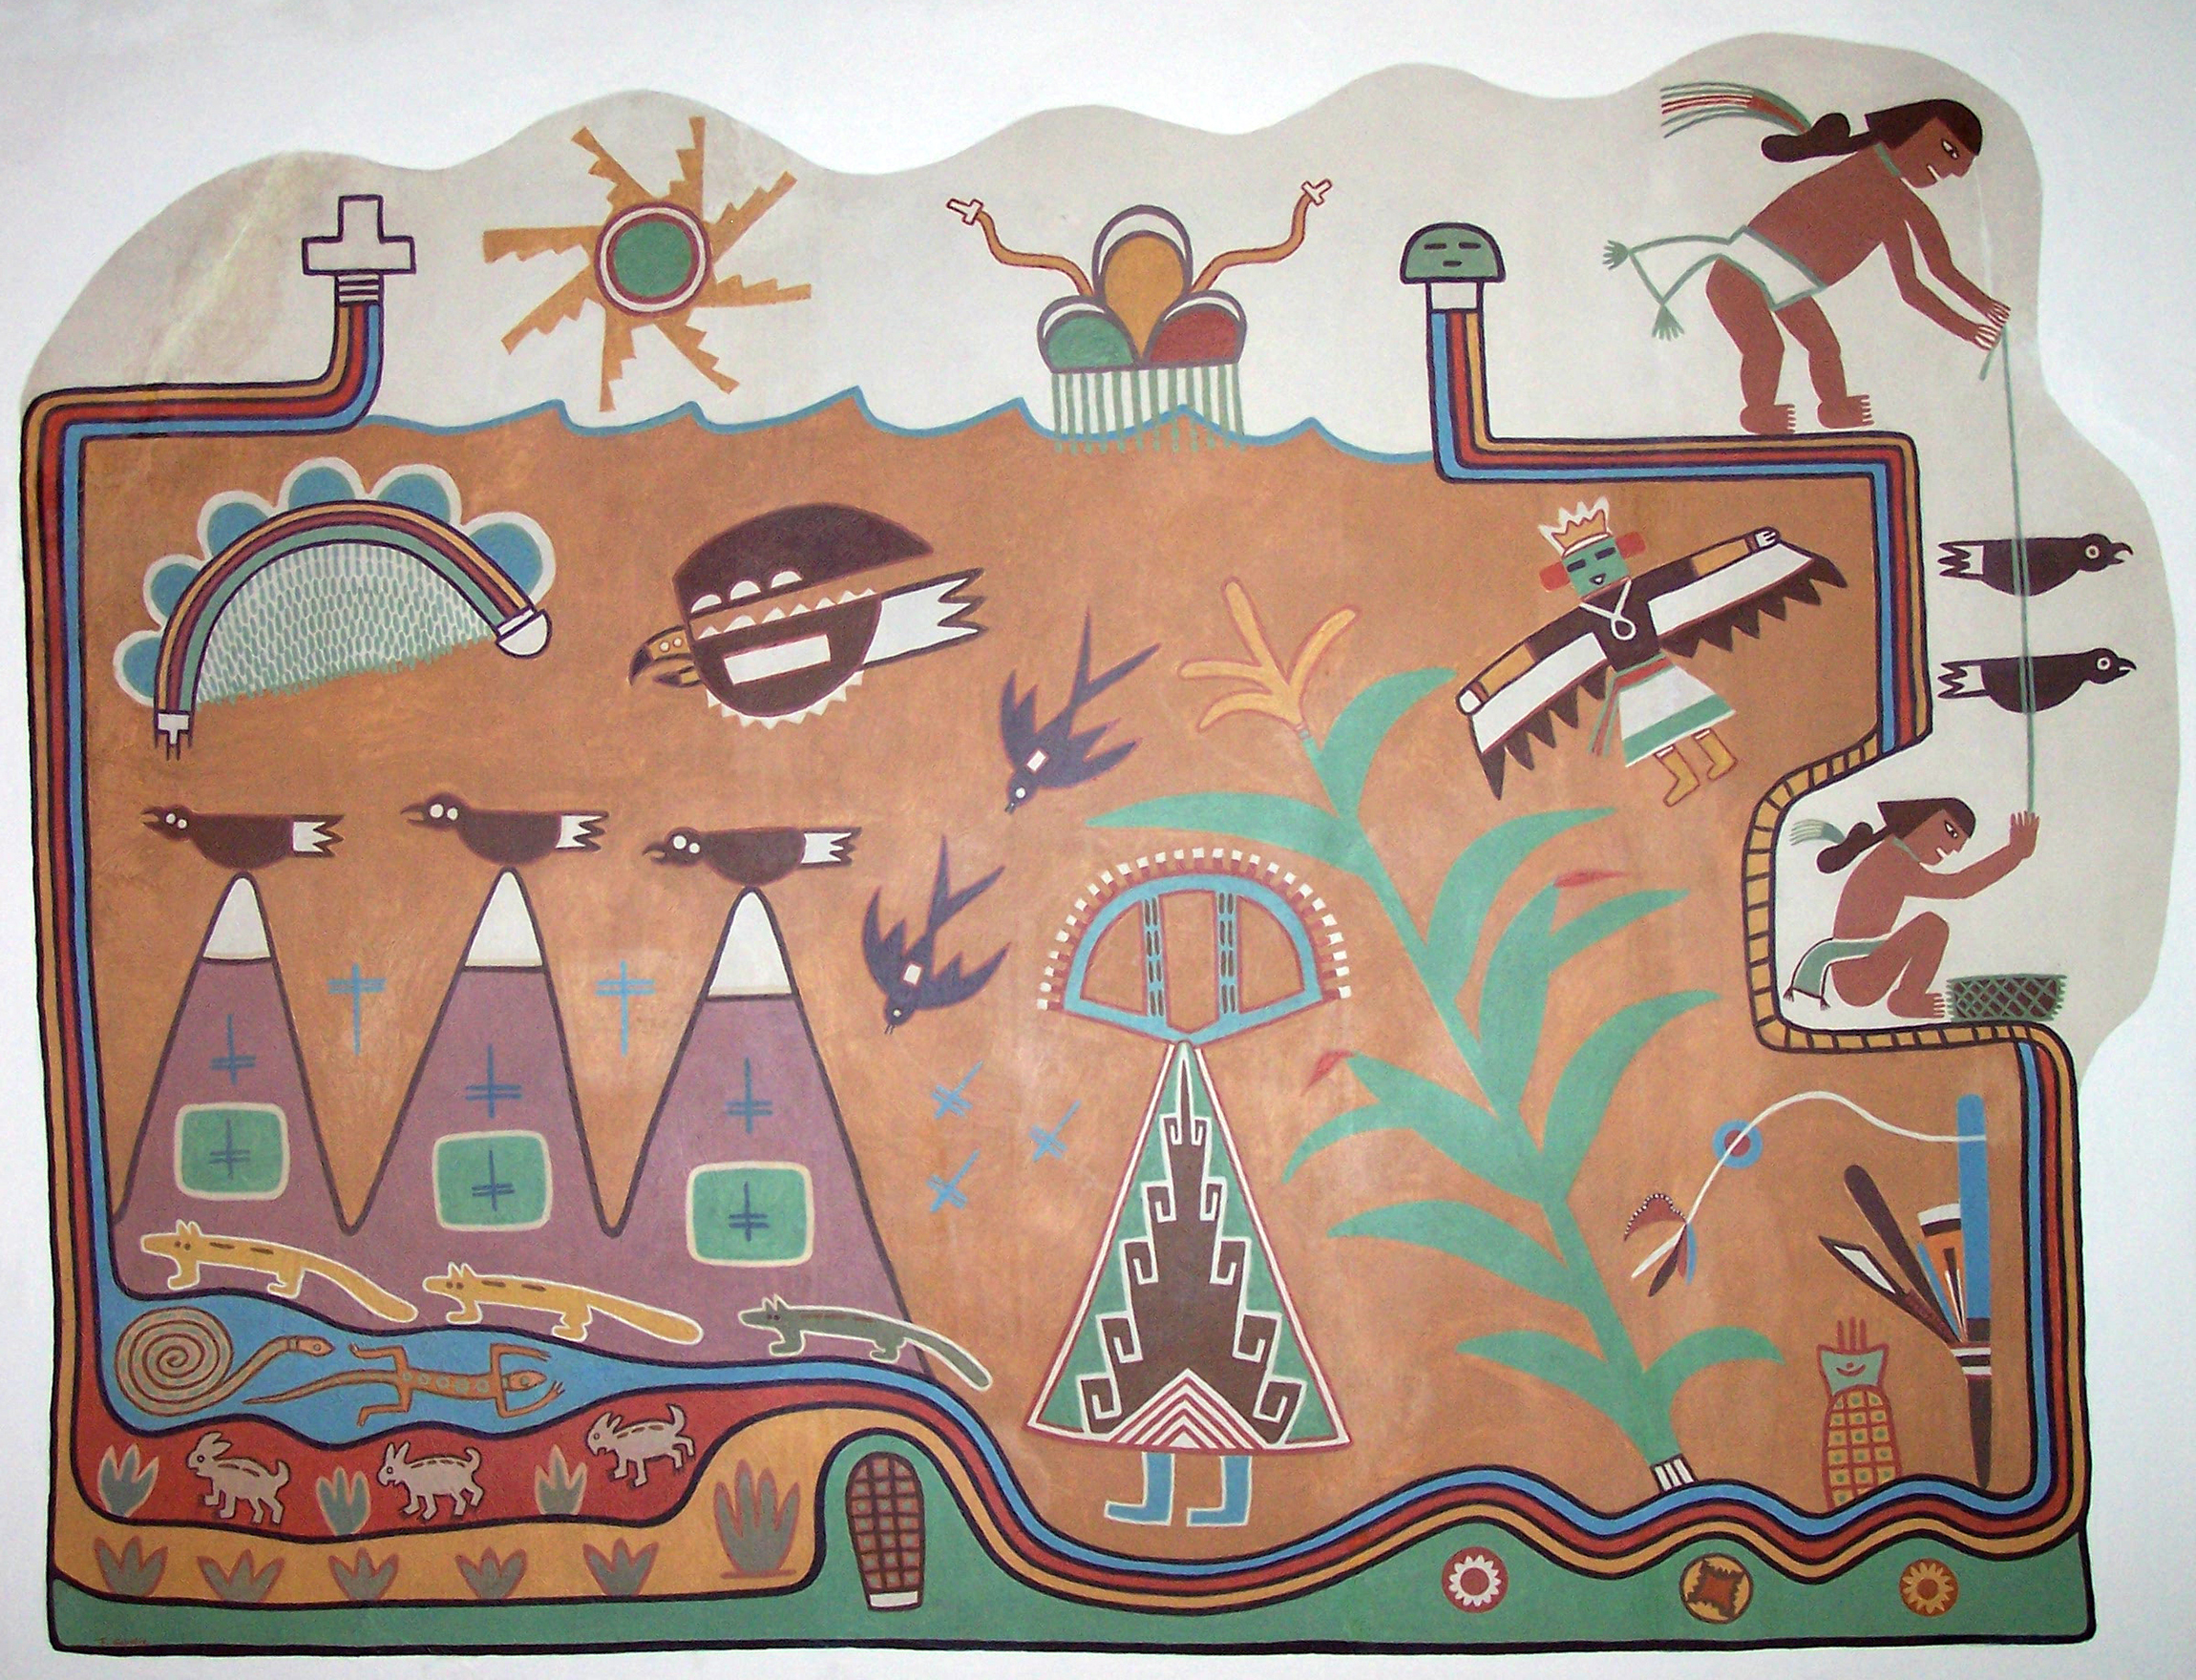 Many Hopi symbols are represented in this mural including eagles, corn, and rain.